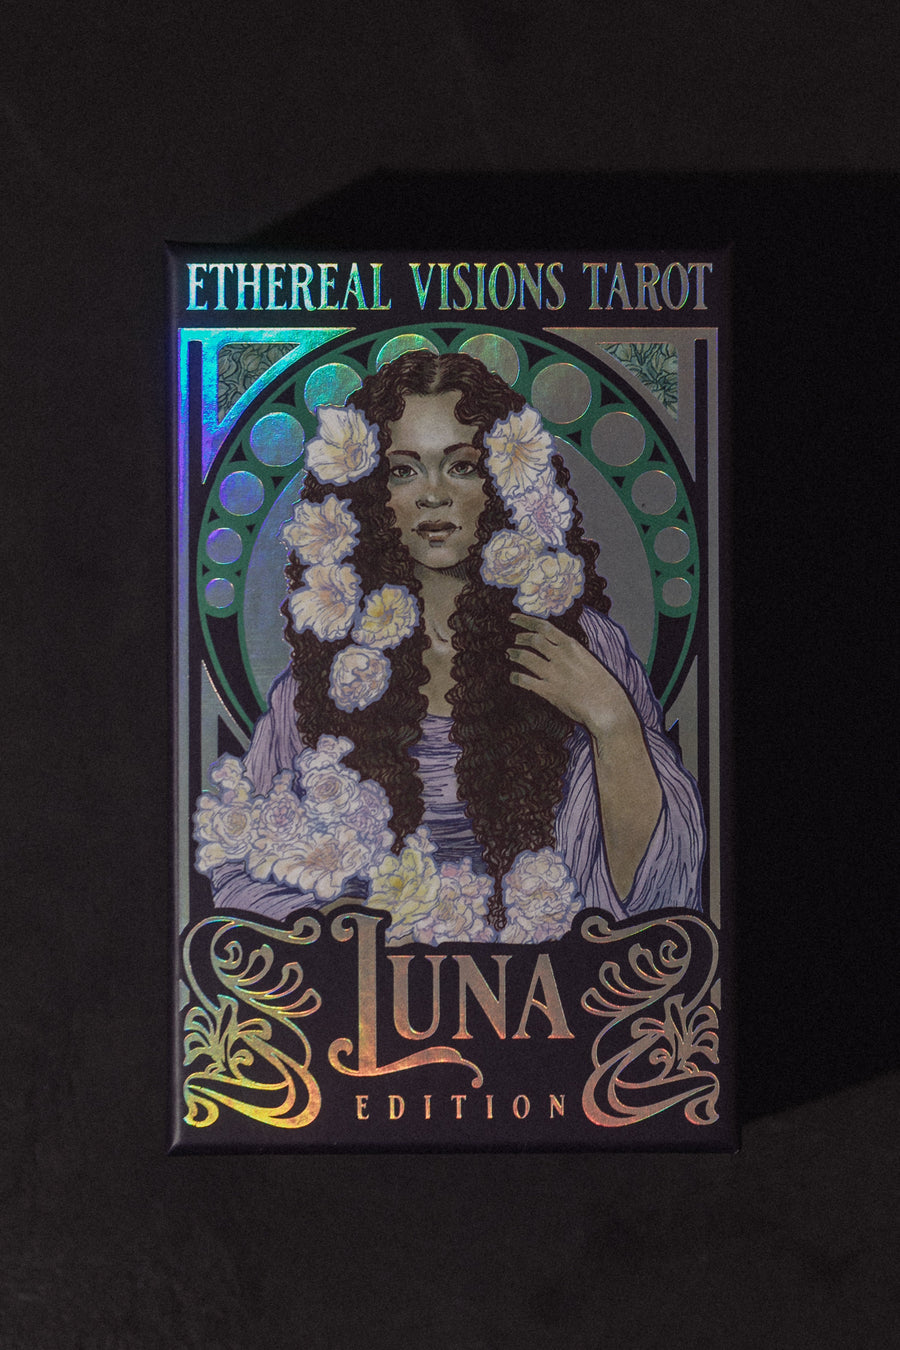 US Games System Objects Gold / FINAL SALE Ethereal Visions Tarot Deck .:. Luna Addition